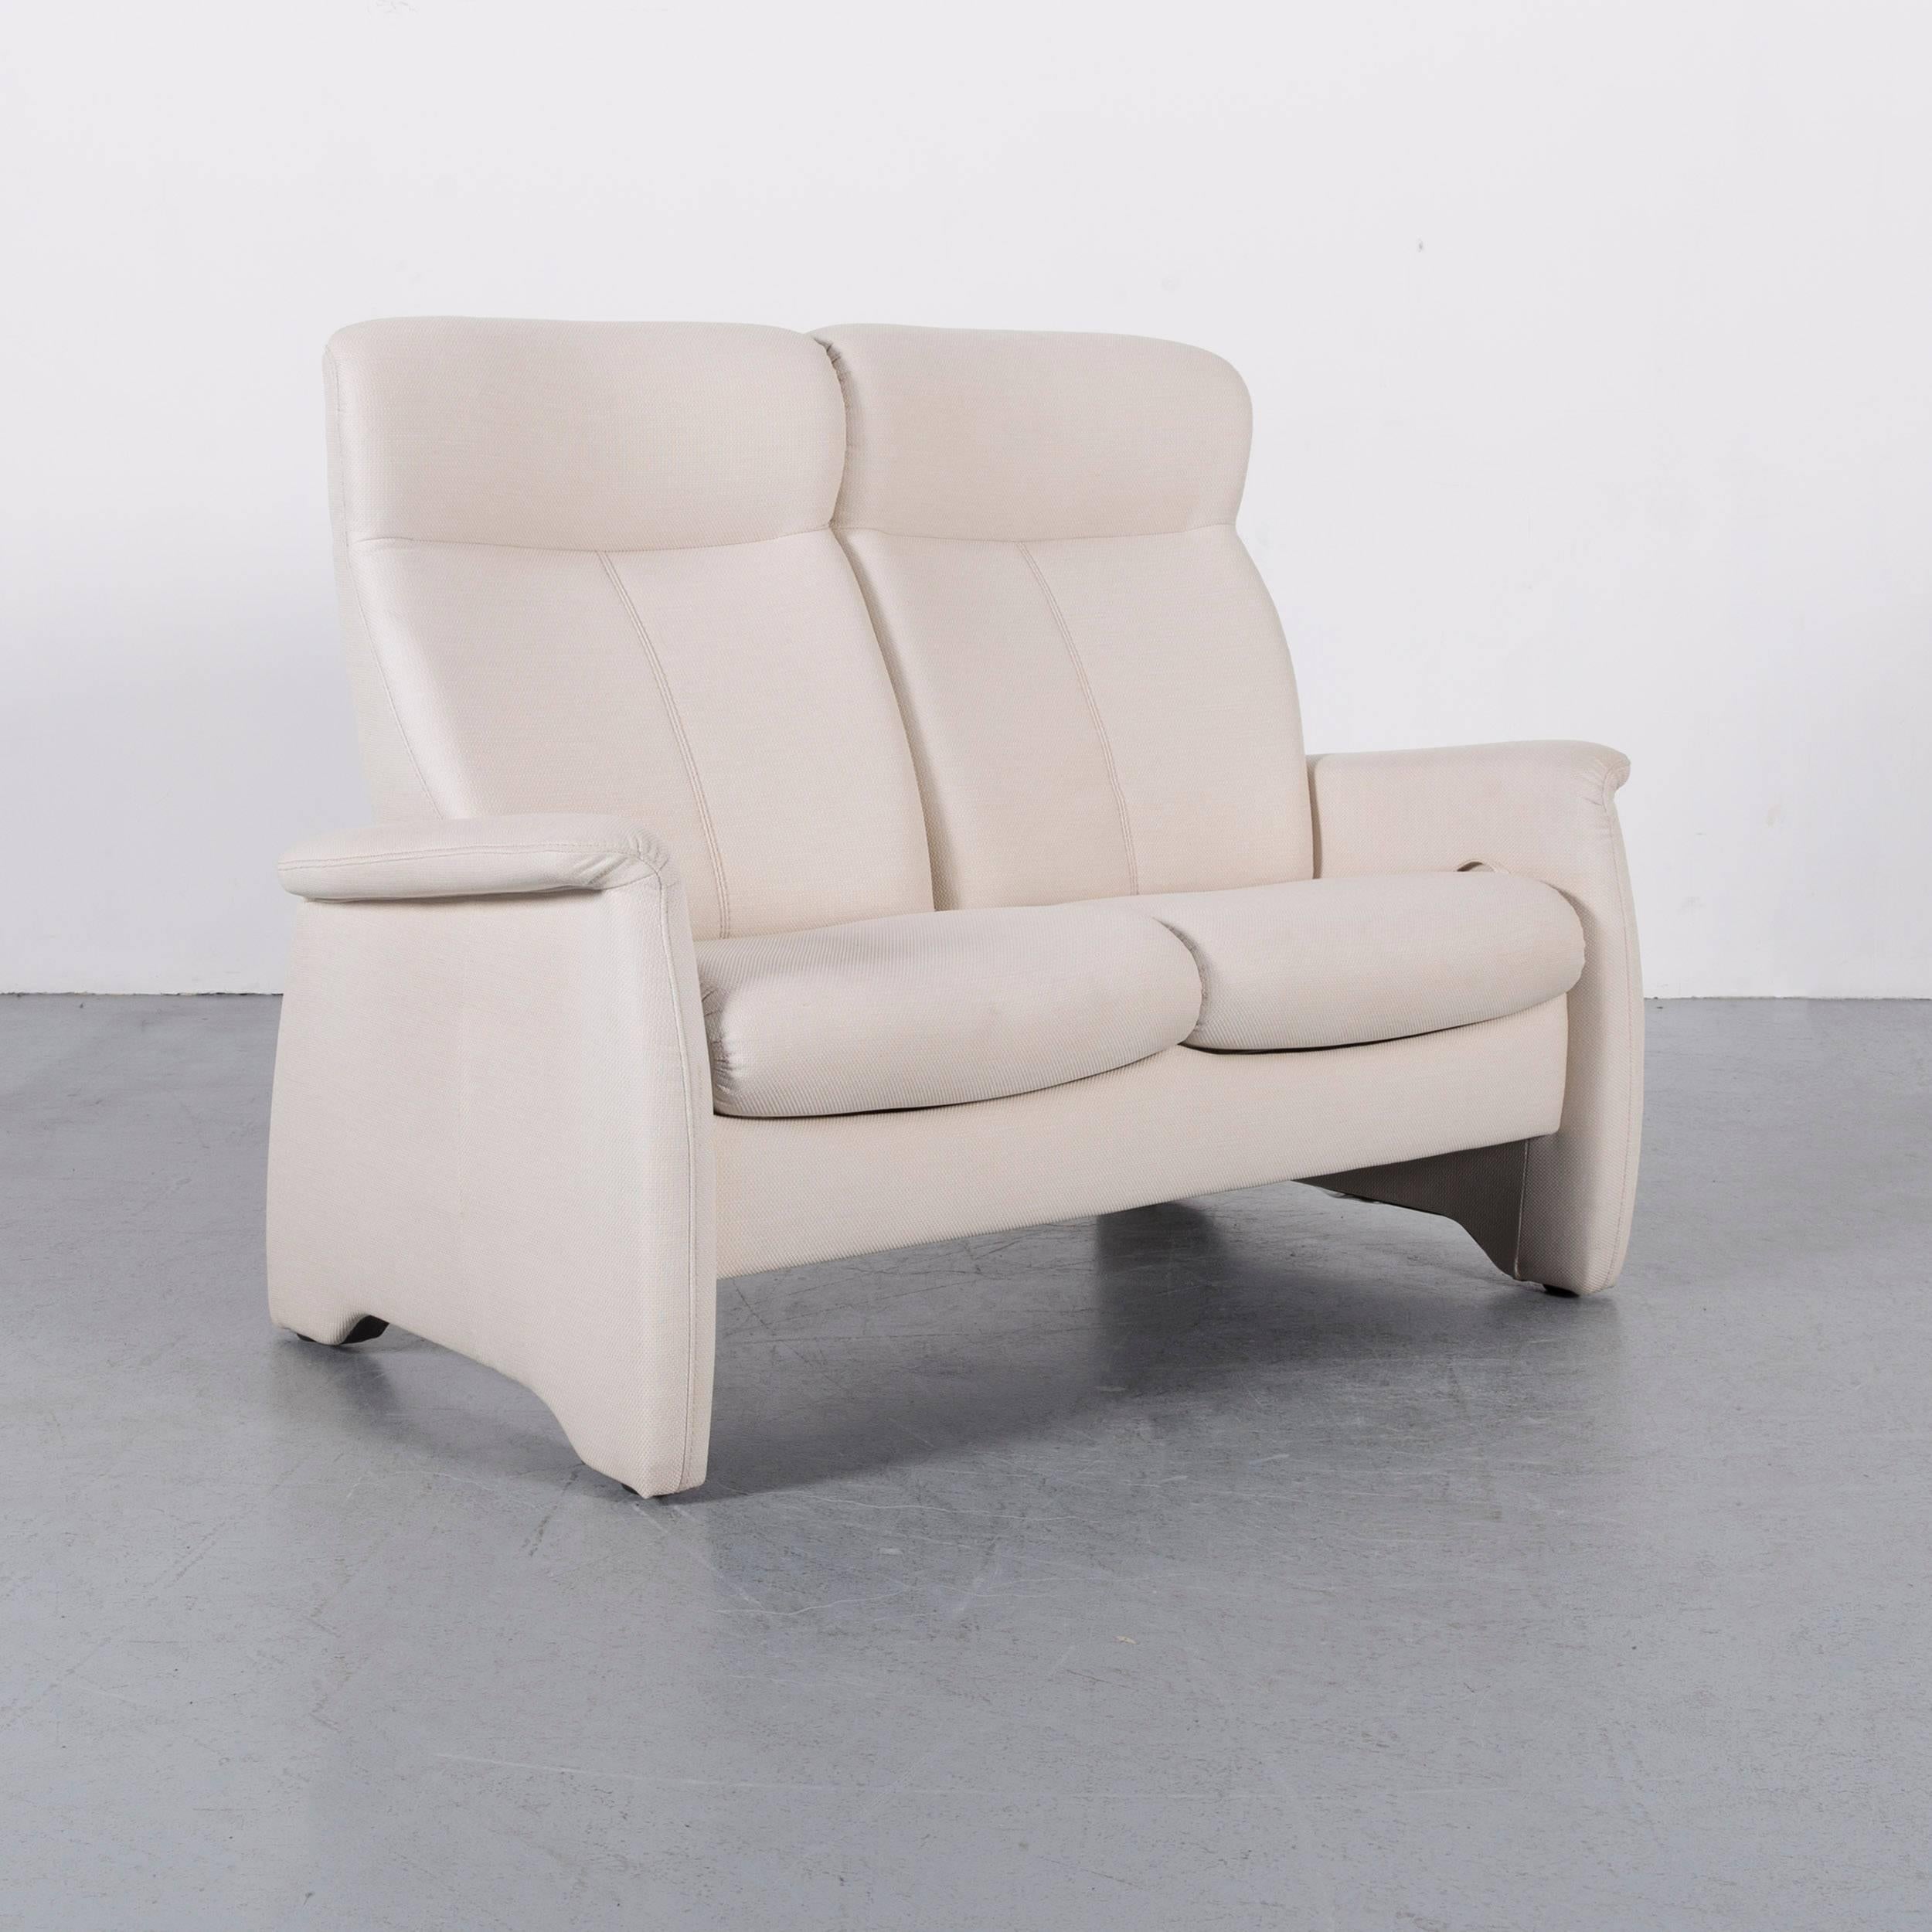 Himolla Fabric Sofa Off-White Two-Seat Couch Recliner In Excellent Condition For Sale In Cologne, DE